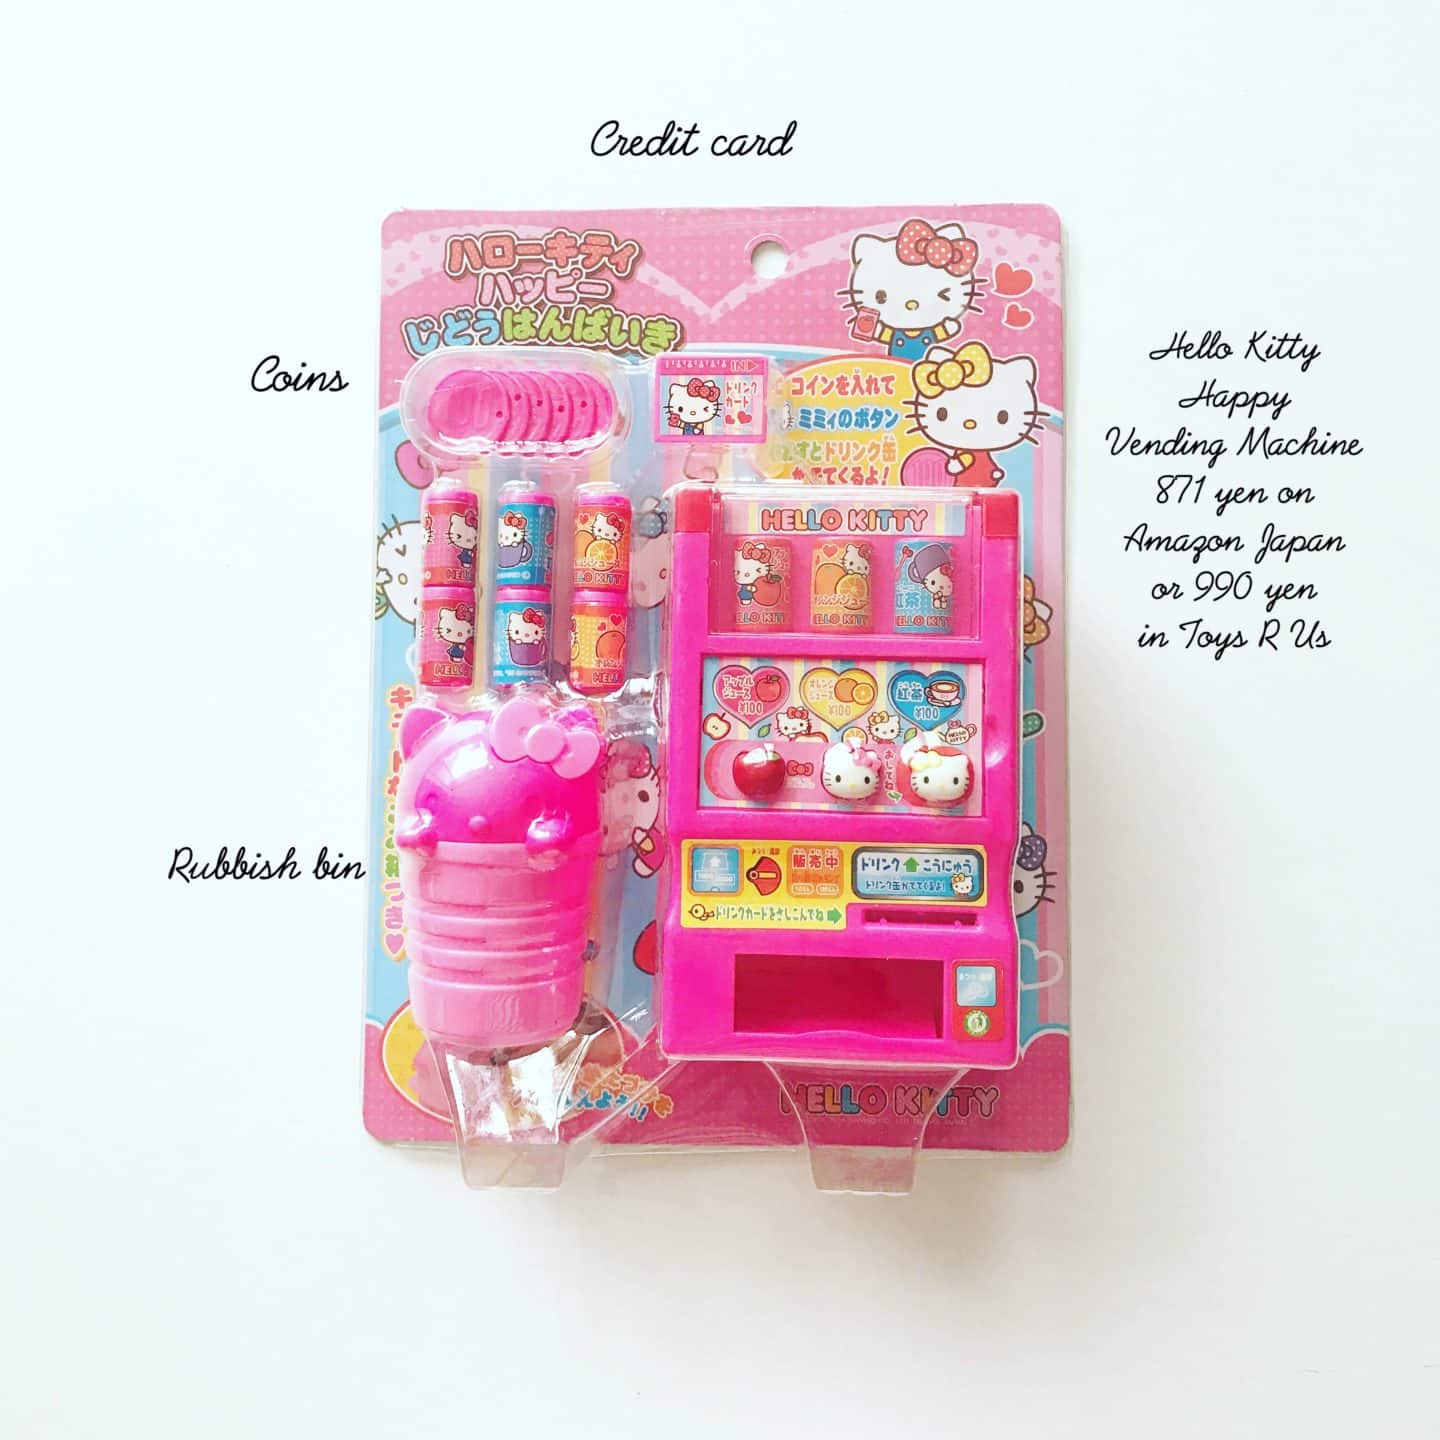 hello kitty gifts for 5 year old